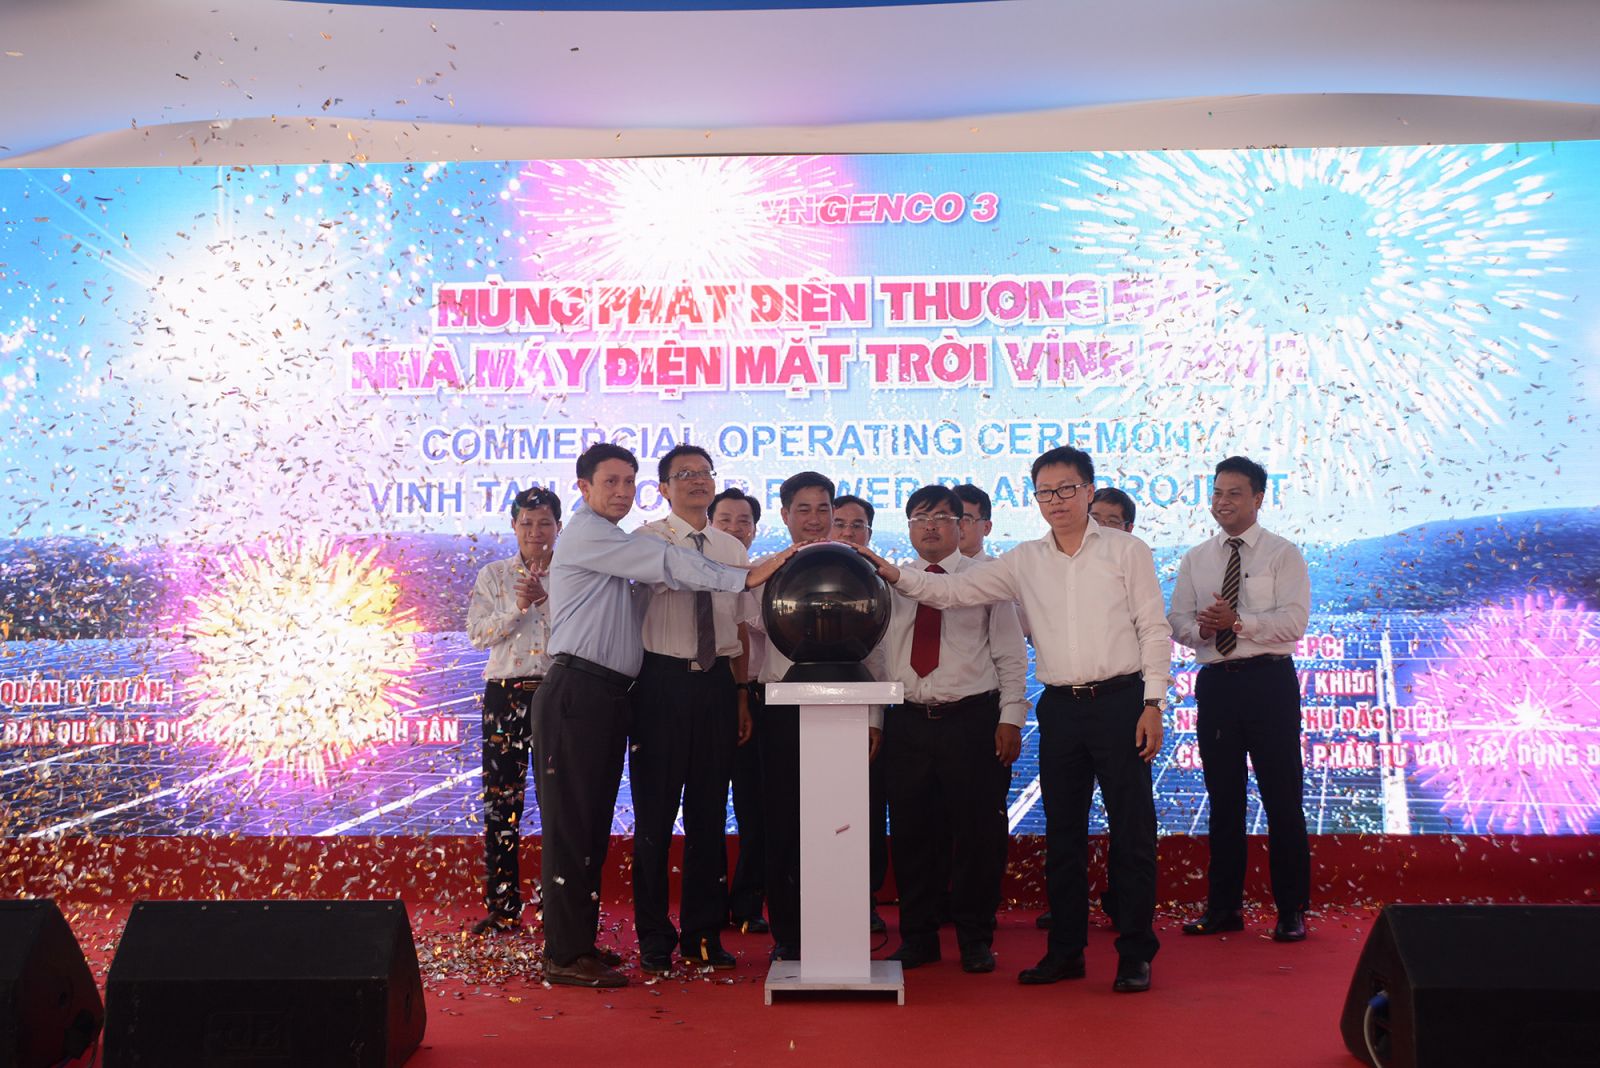 Vinh Tan 2 solar power plant in Binh Thuan was officially put into commercial operation on June 22.